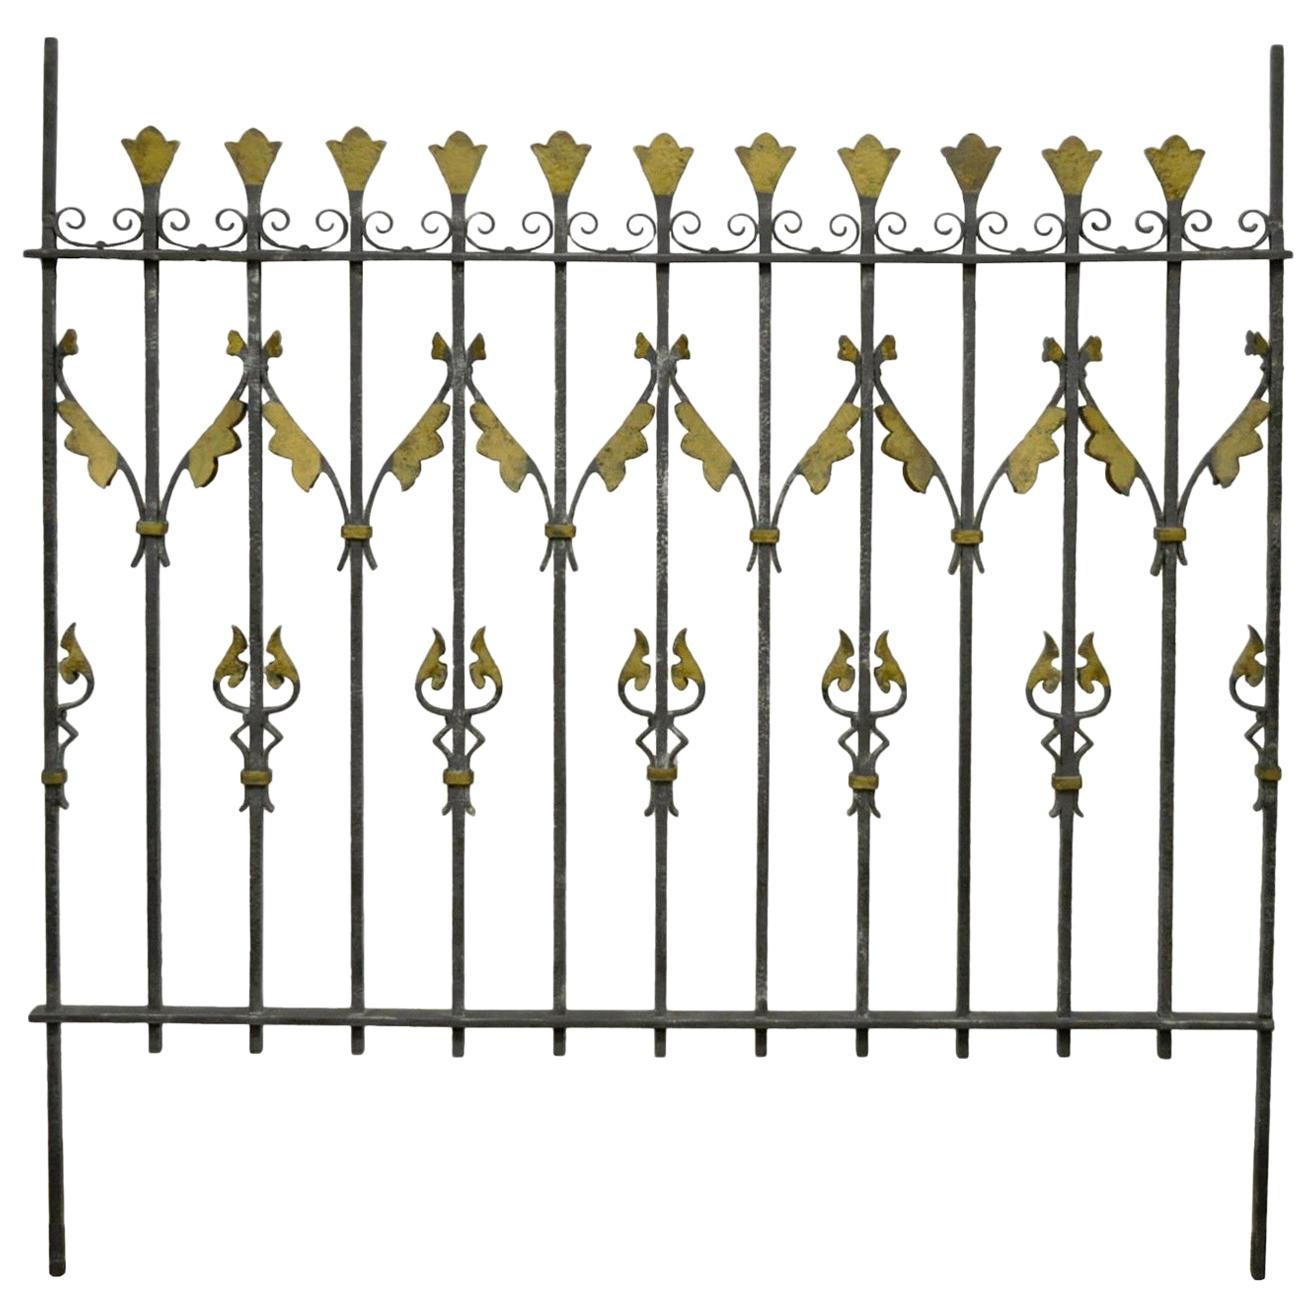 Vintage French Art Nouveau Gilt Wrought Iron Full Size Bed Headboard Fence Gate